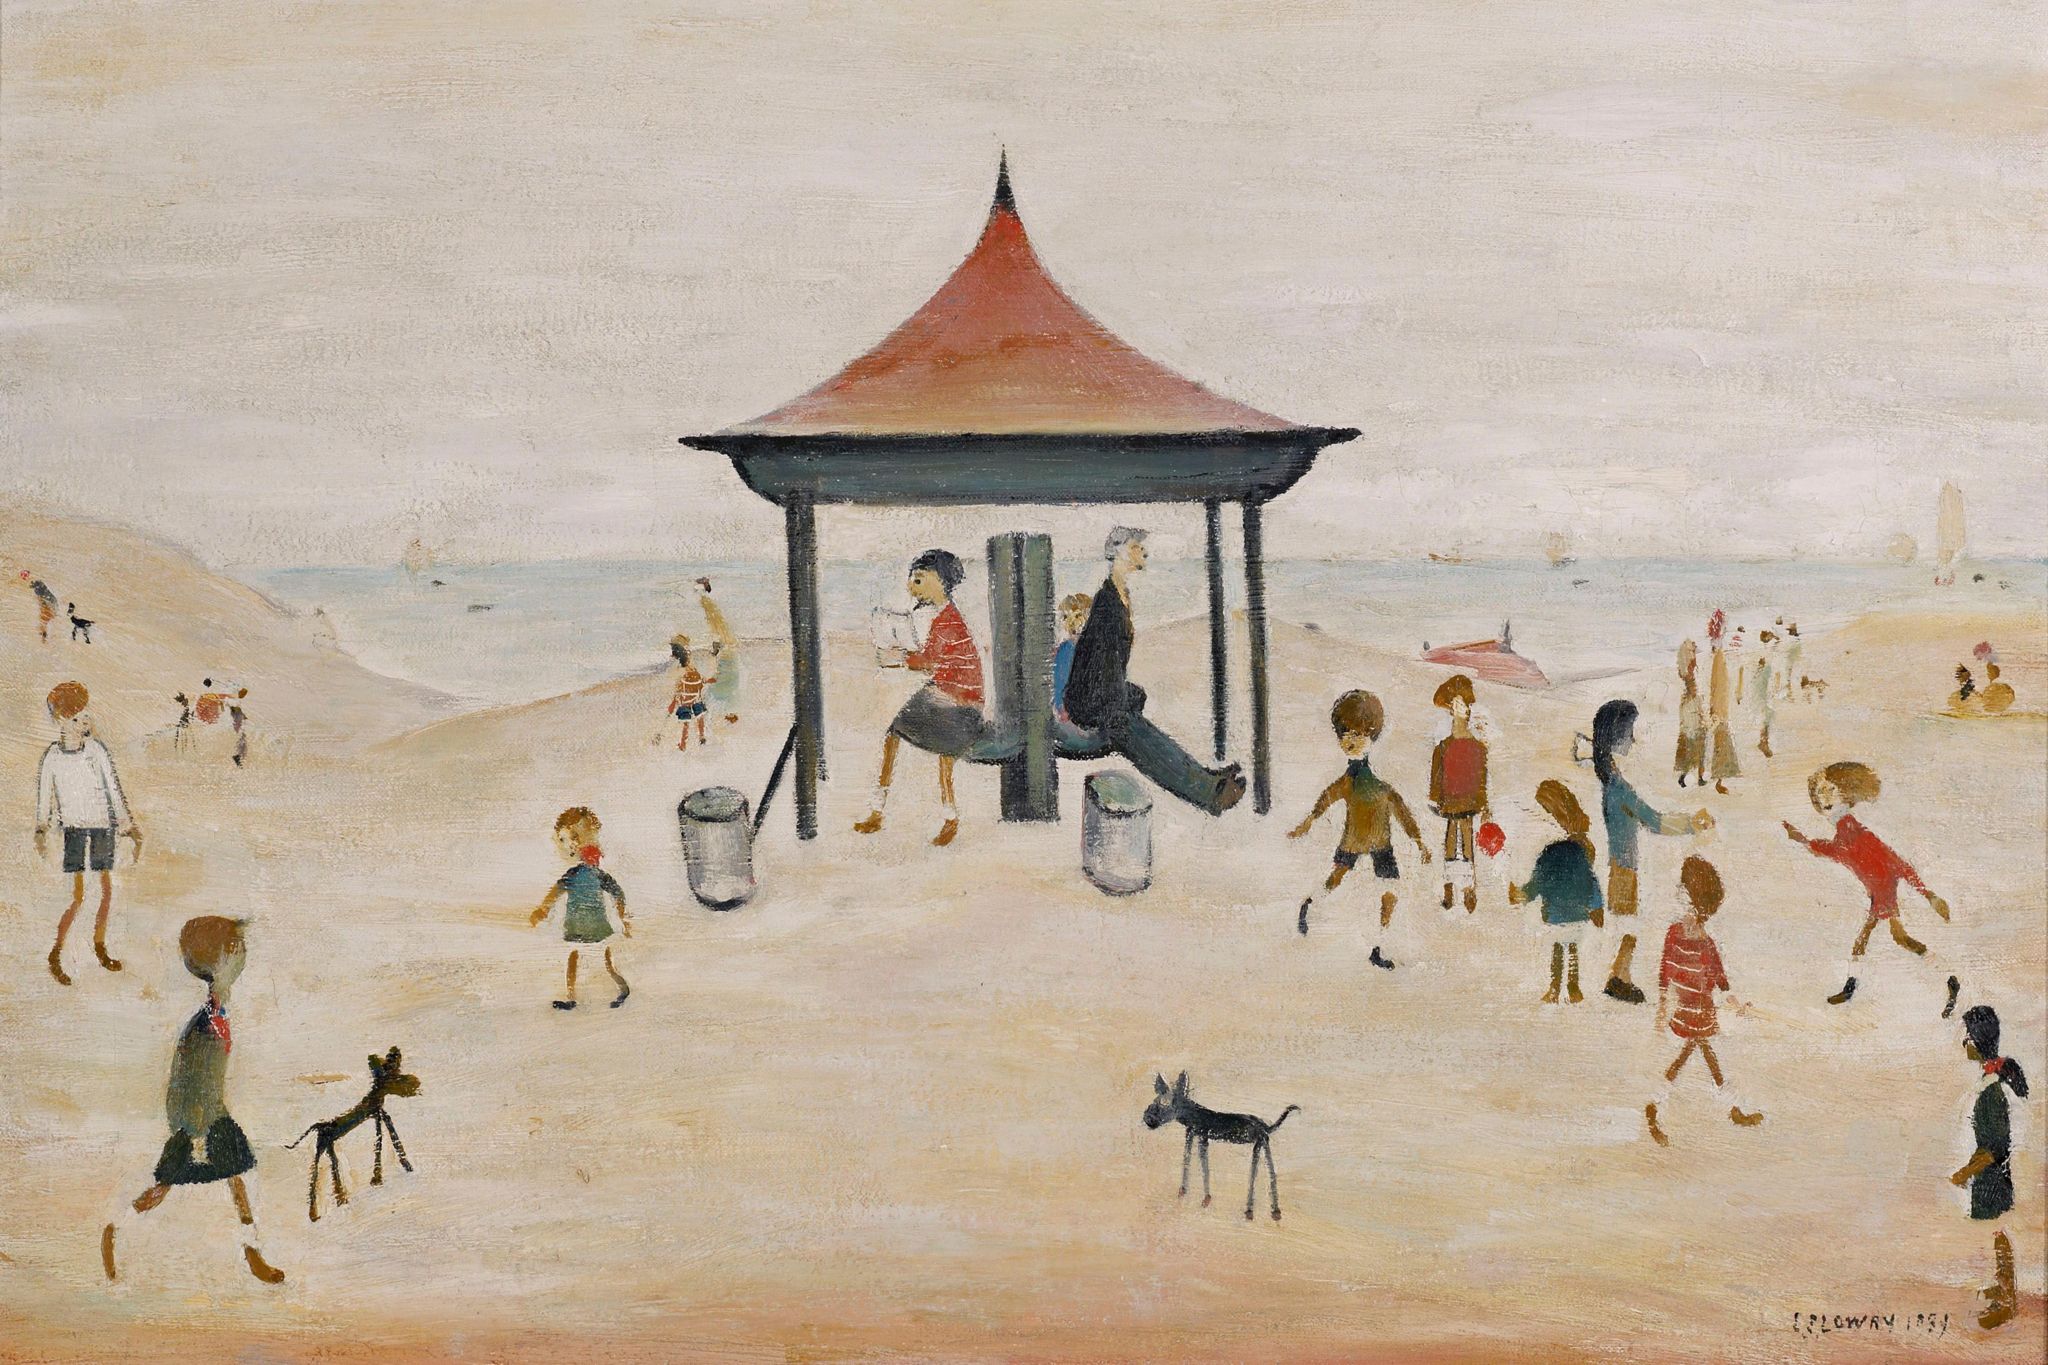 Image of LS Lowry’s painting On the Sands, Berwick, 1959